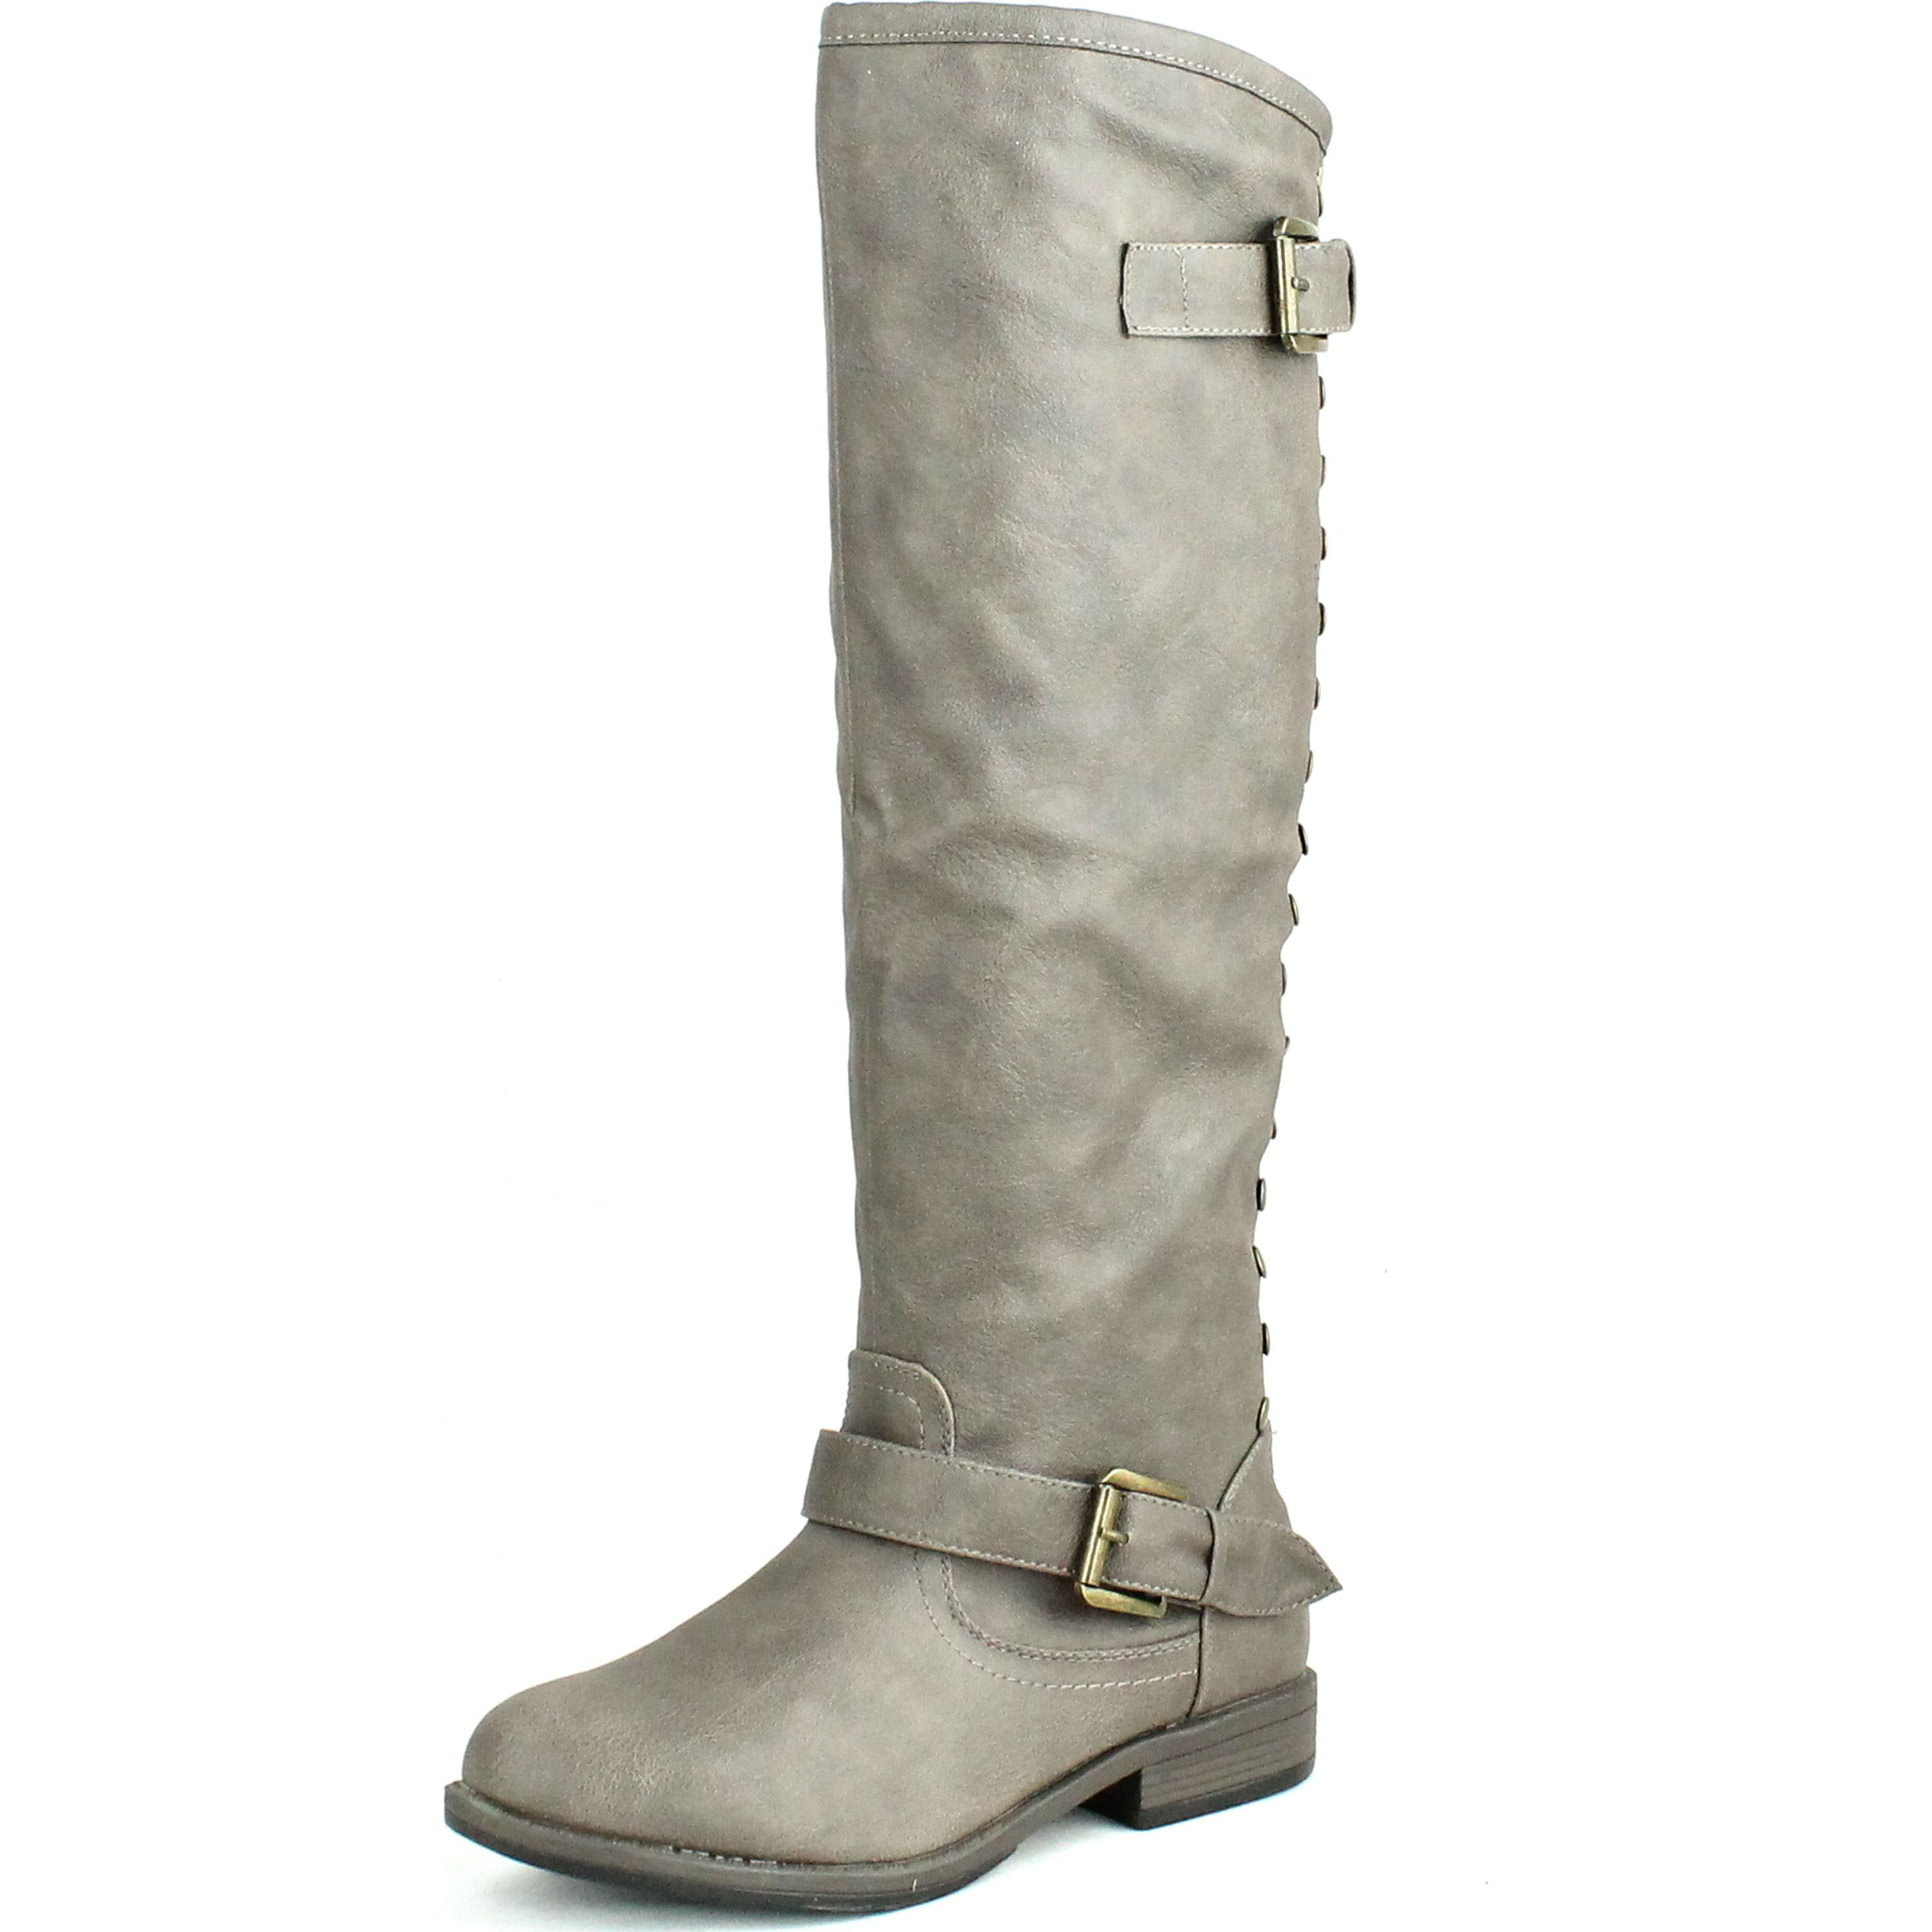 Bamboo Women's Montage 83 Riding Boots with Zipper - image 1 of 4